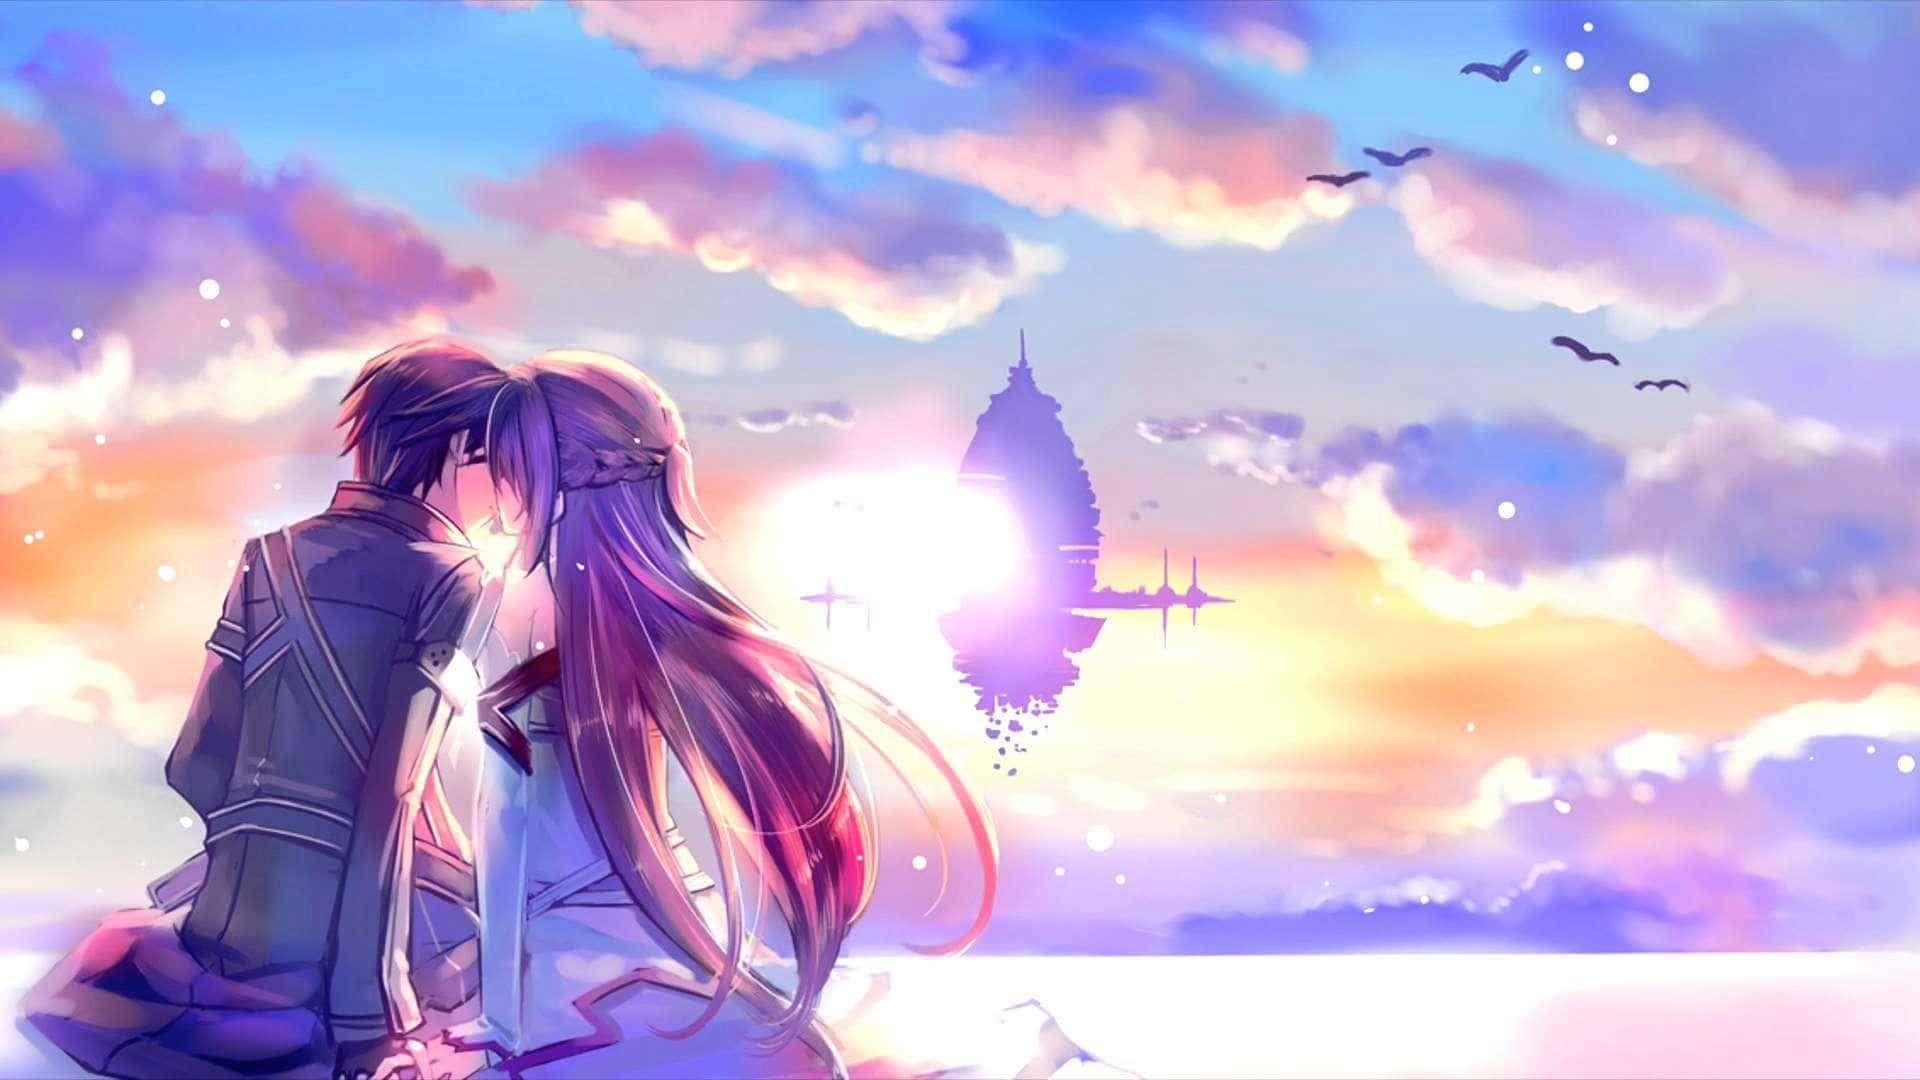 Anime Kissing Drawing Wallpapers - Wallpaper Cave